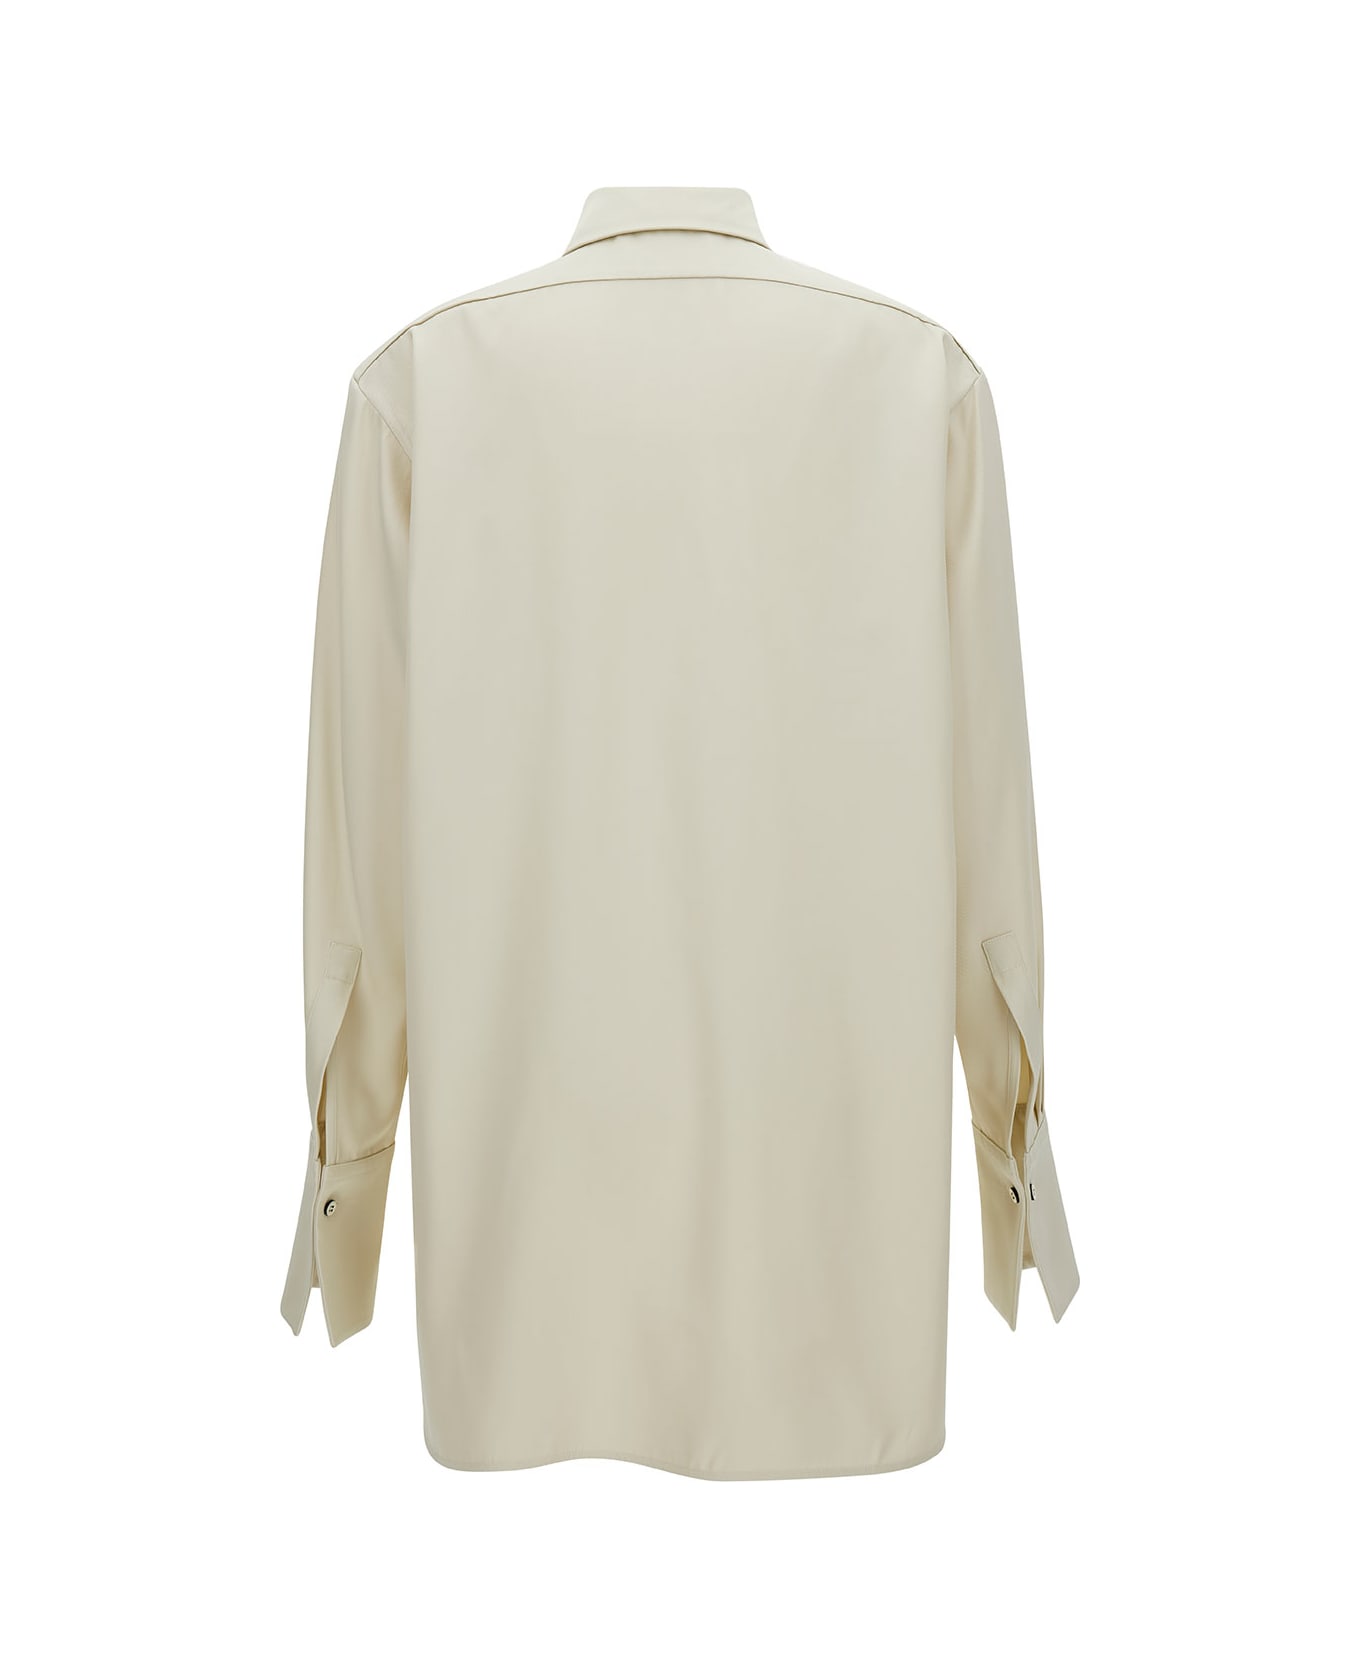 Jil Sander Beige Shirt With Classic Collar And Concealed Closure In Silk Woman - Beige